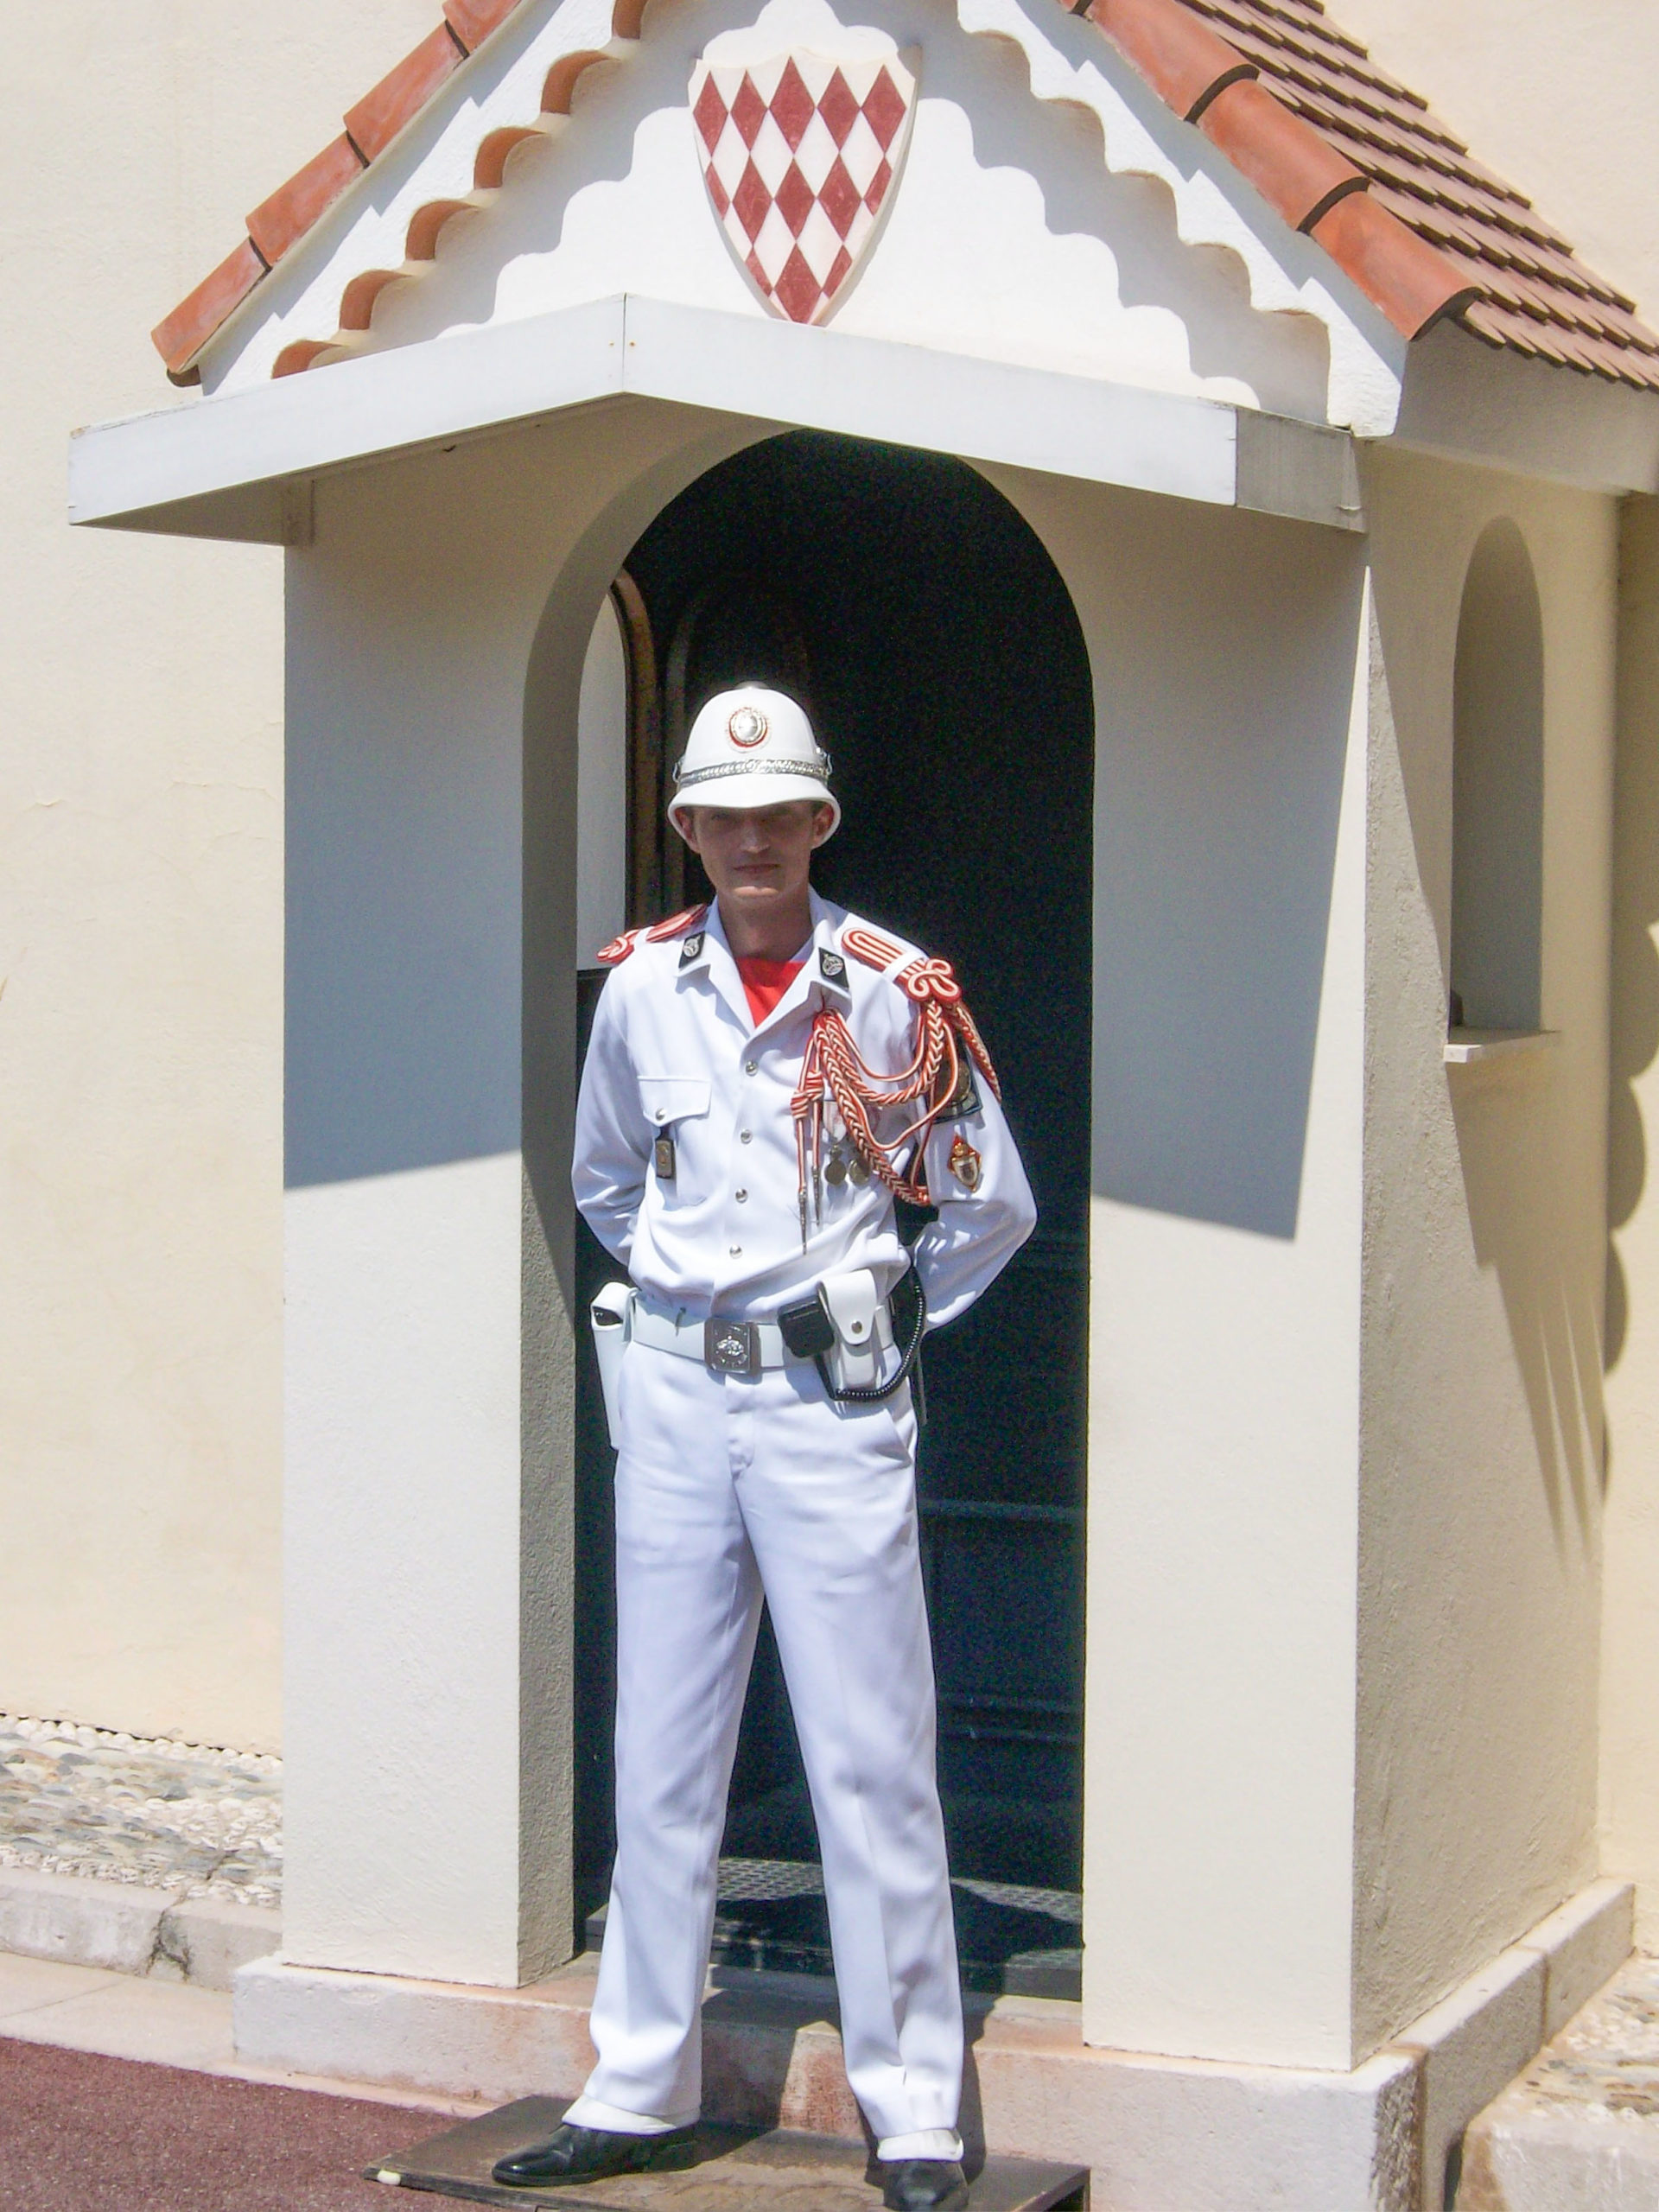 Monaco Guard © Kevin.B - licence [CC BY-SA 3.0] from Wikimedia Commons